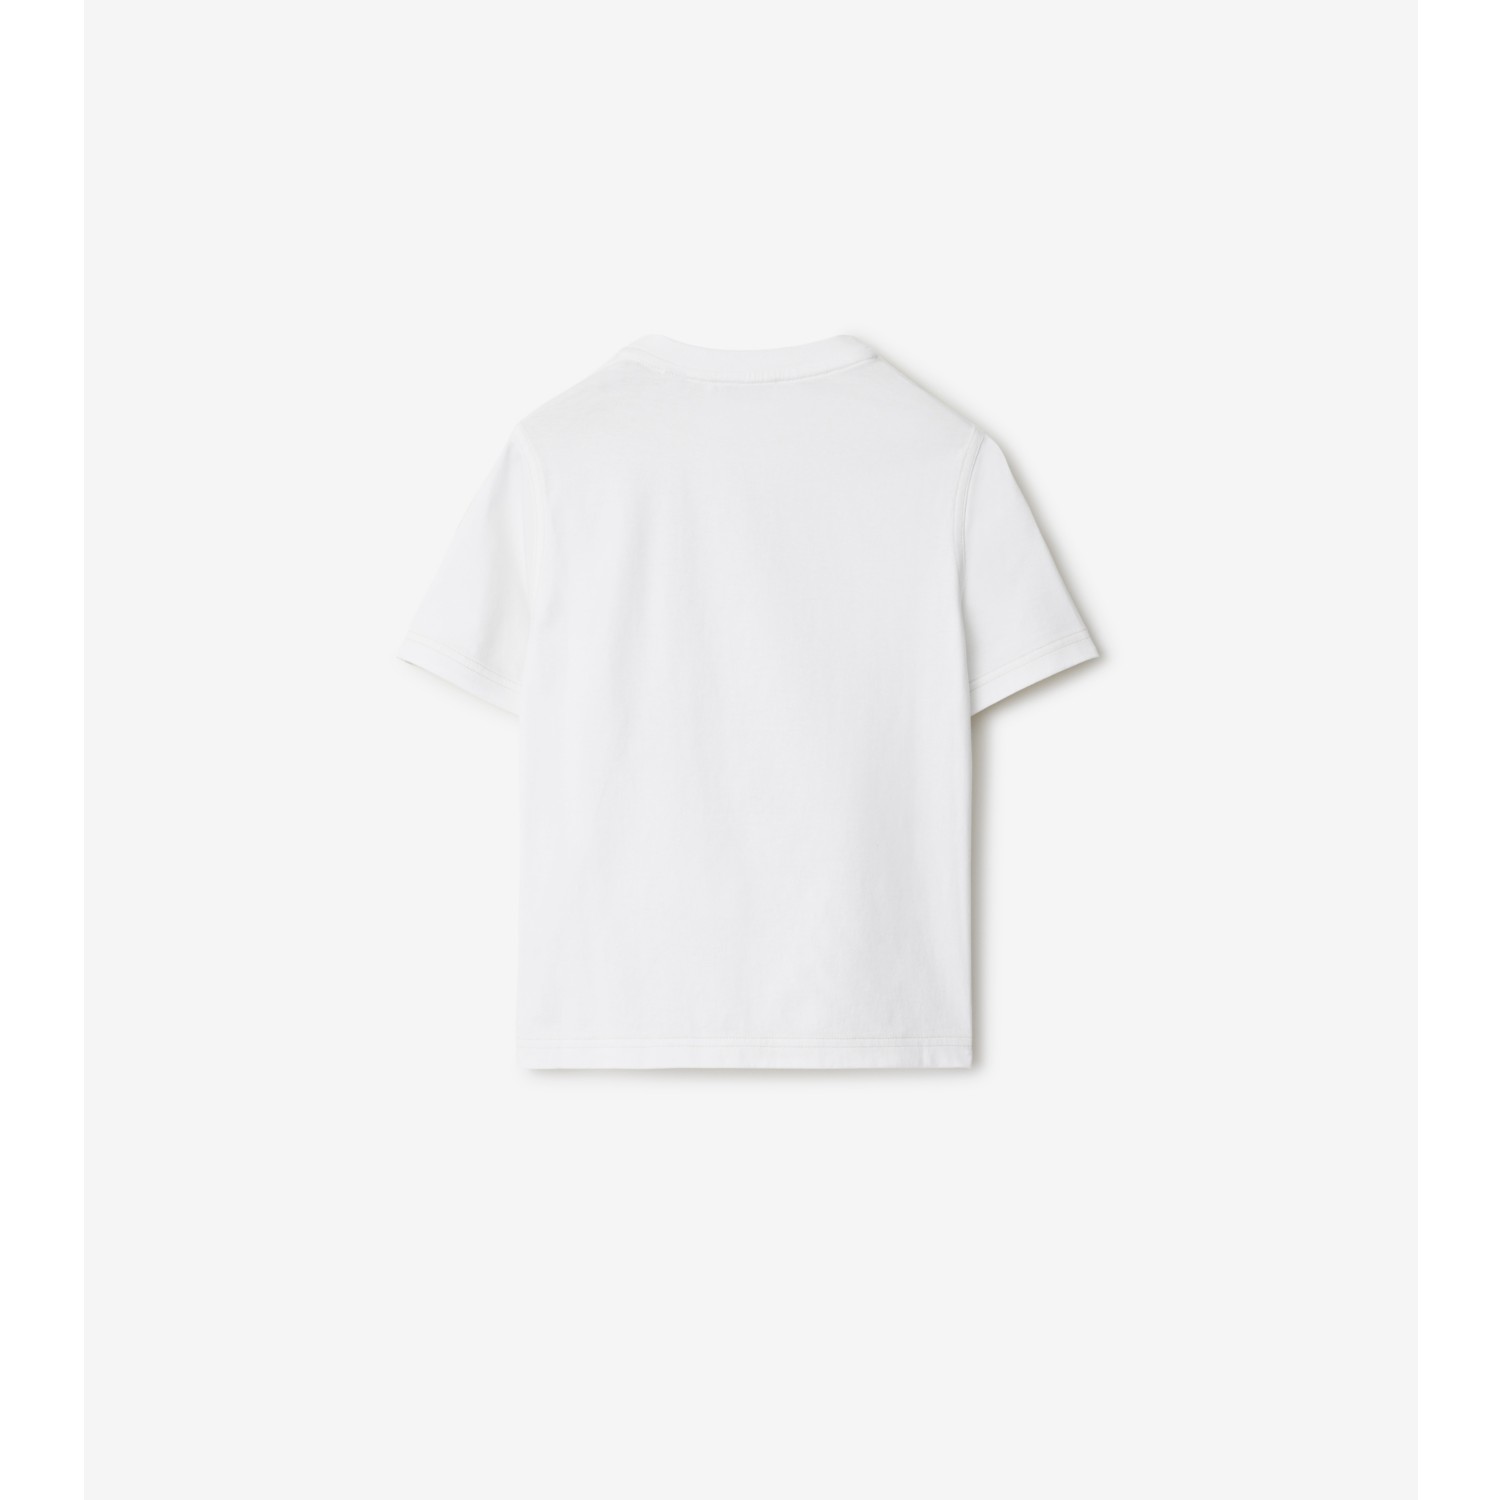 Foxglove Cotton T-shirt in Calico | Burberry® Official